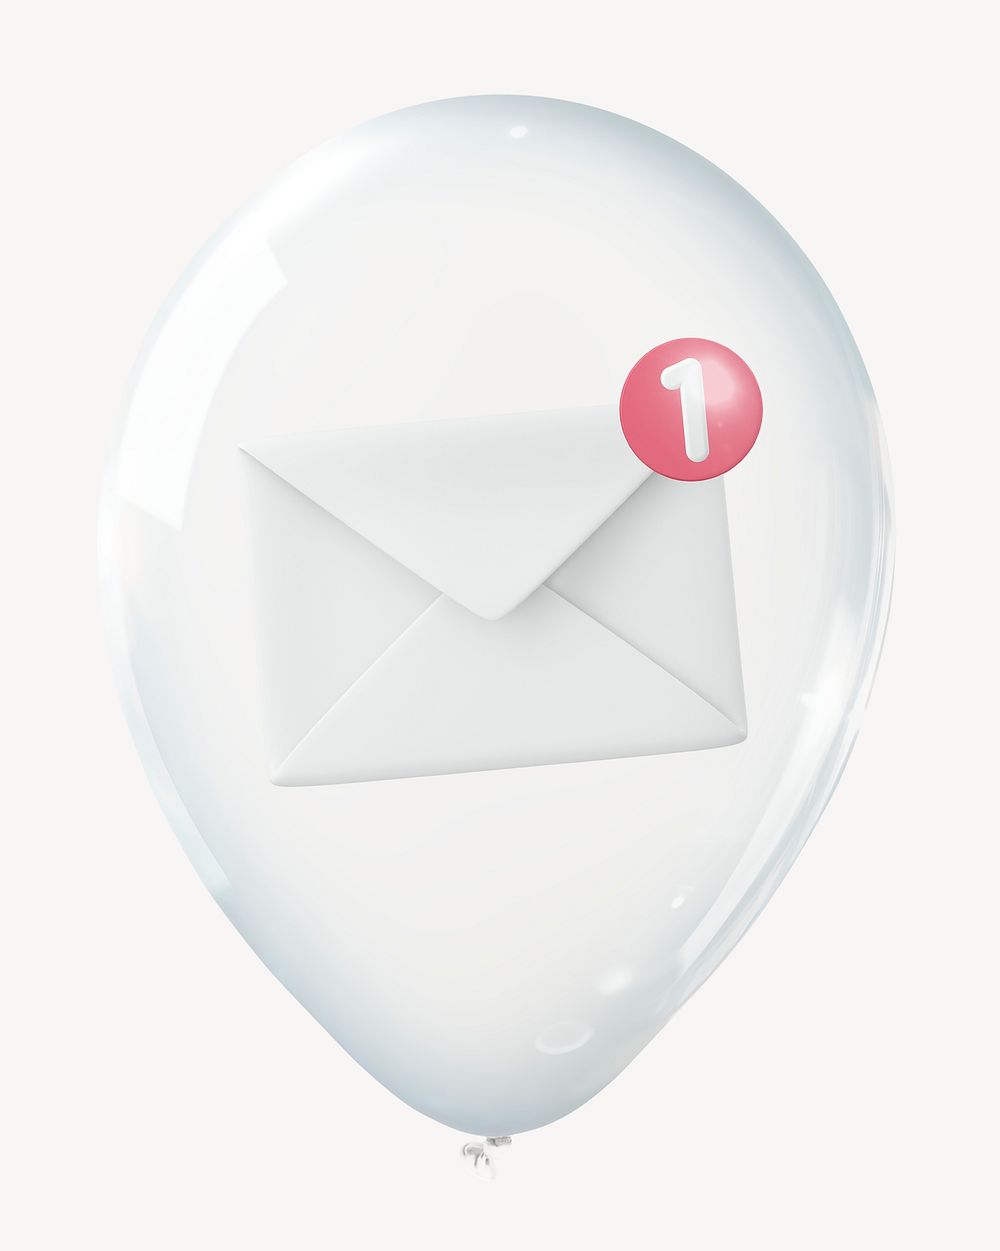 Email notification 3D balloon collage element psd